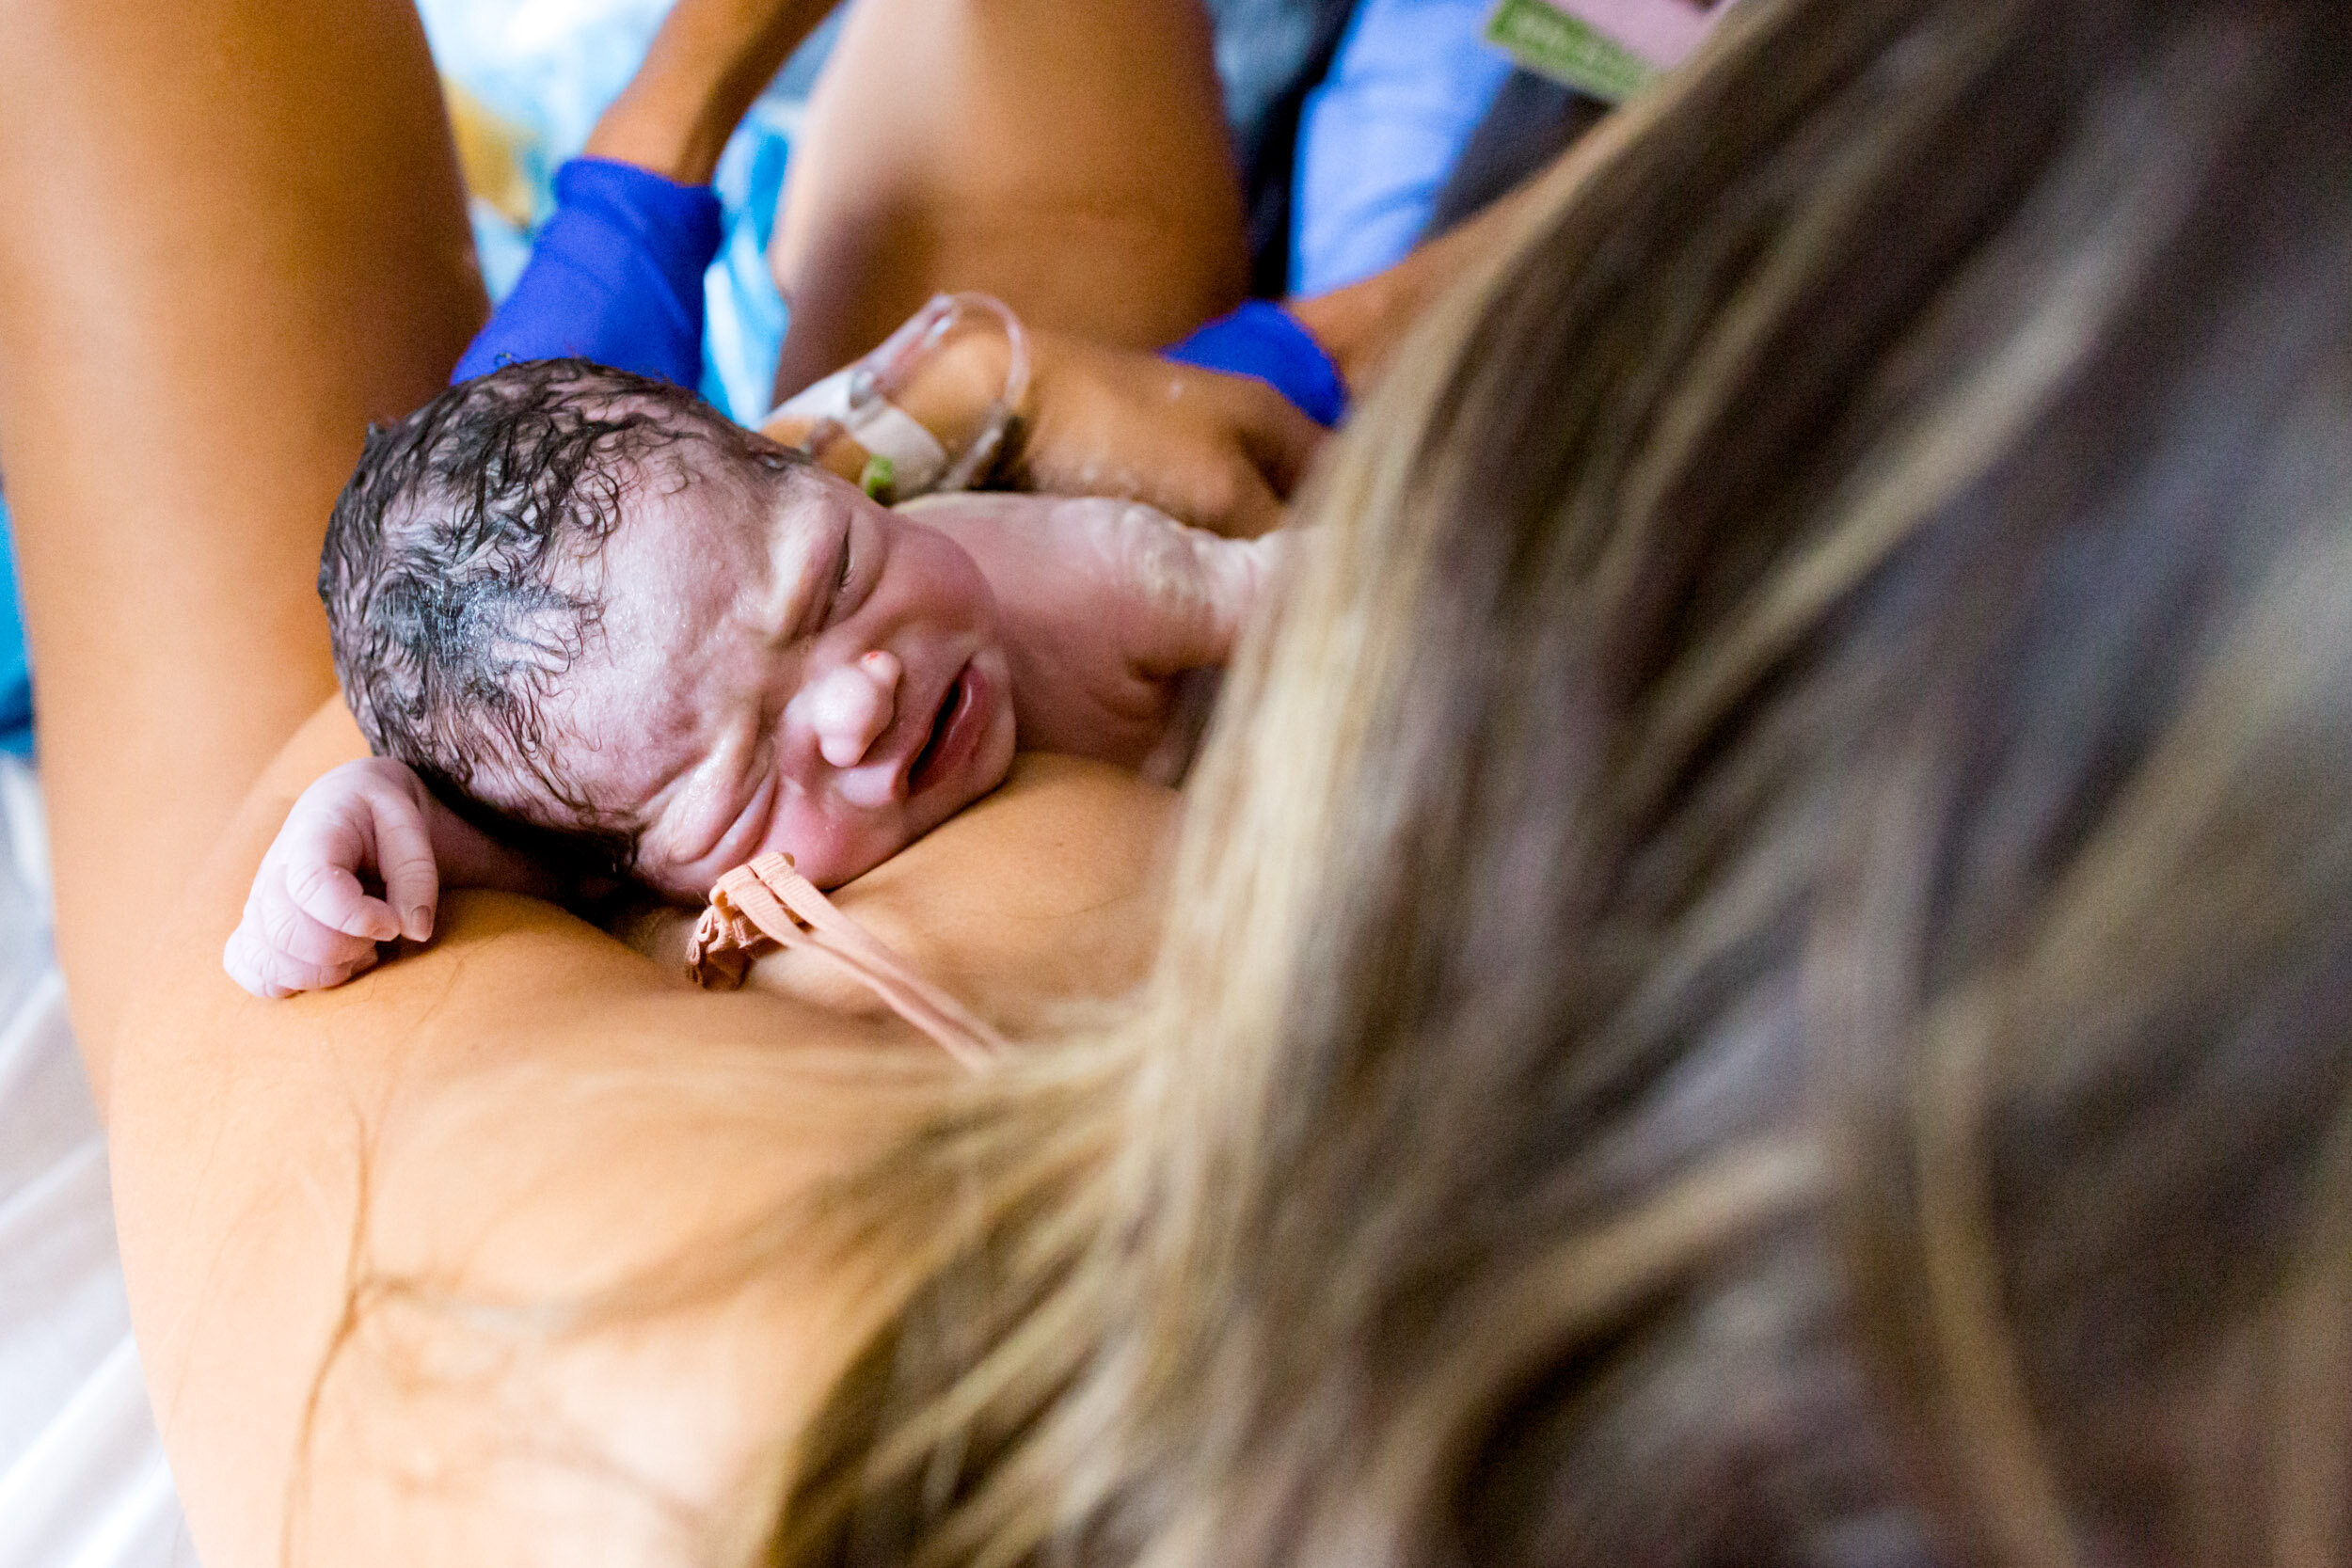 jacksonville mom holding her baby for skin-to-skin just after birth